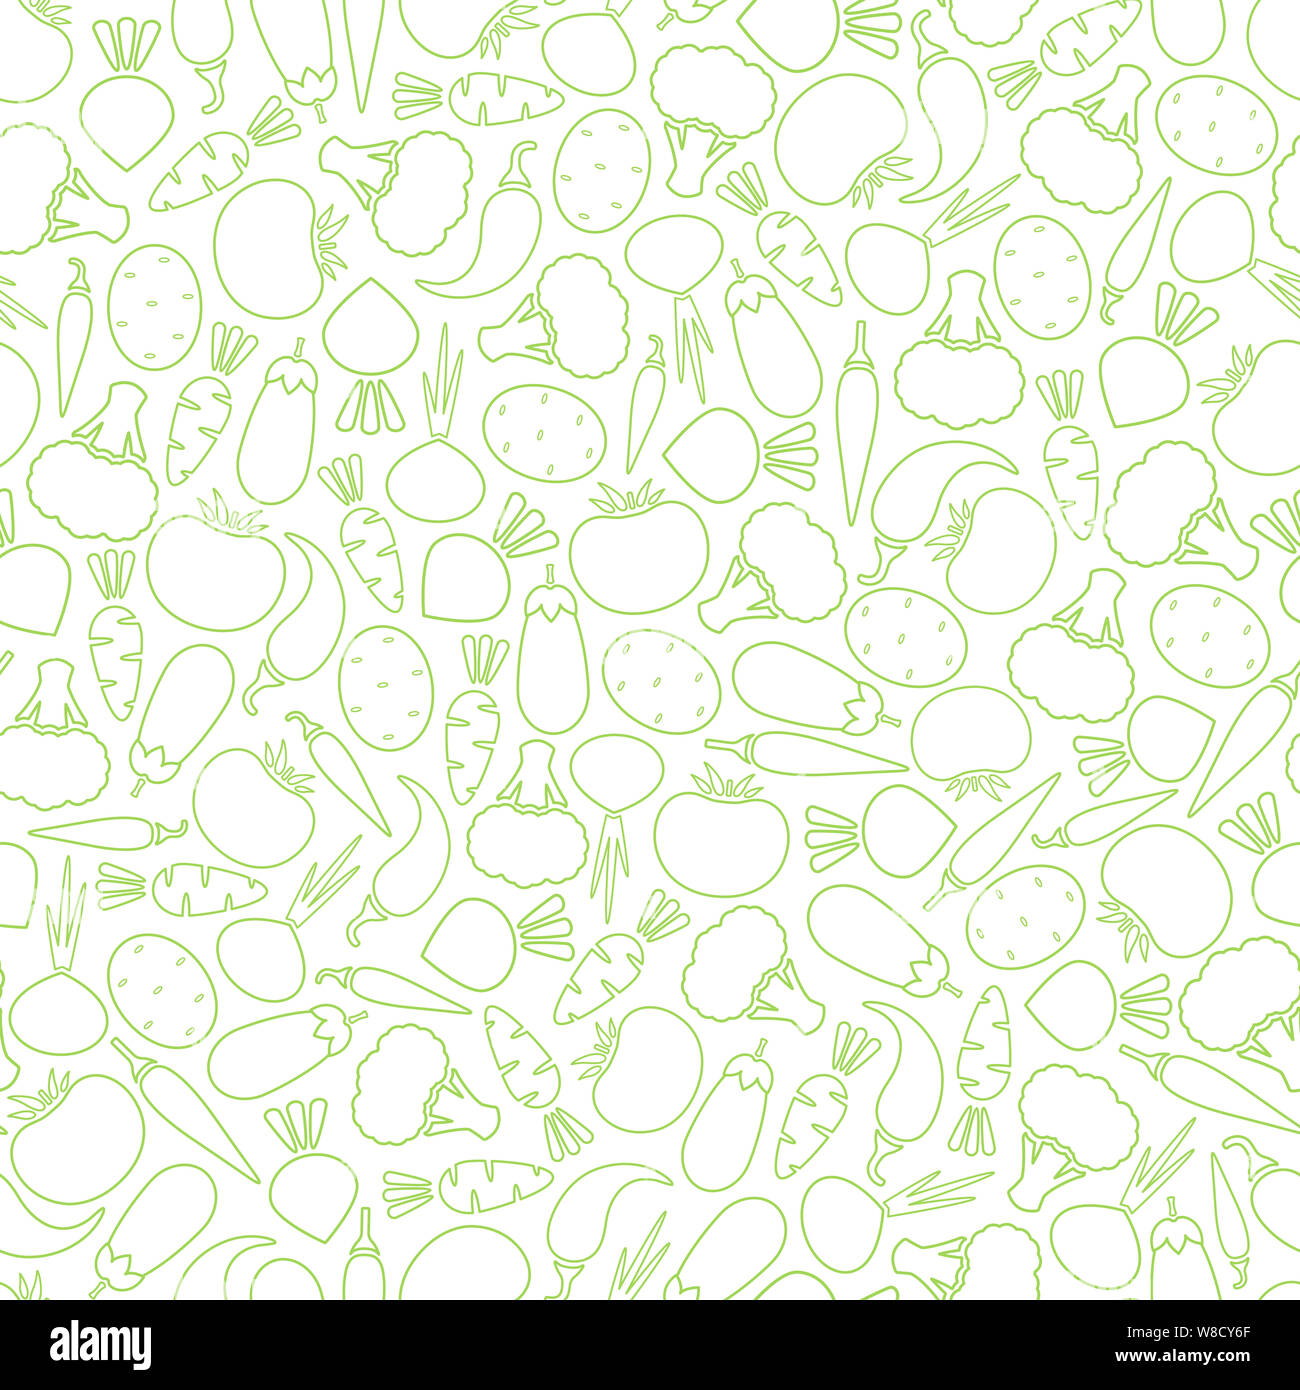 Line silhouette seamless vegetable pattern flat illustration. Modern seamless texture food pattern design with autumn line vegetable in green and white colors for diet decor, vintage wallpaper Stock Photo